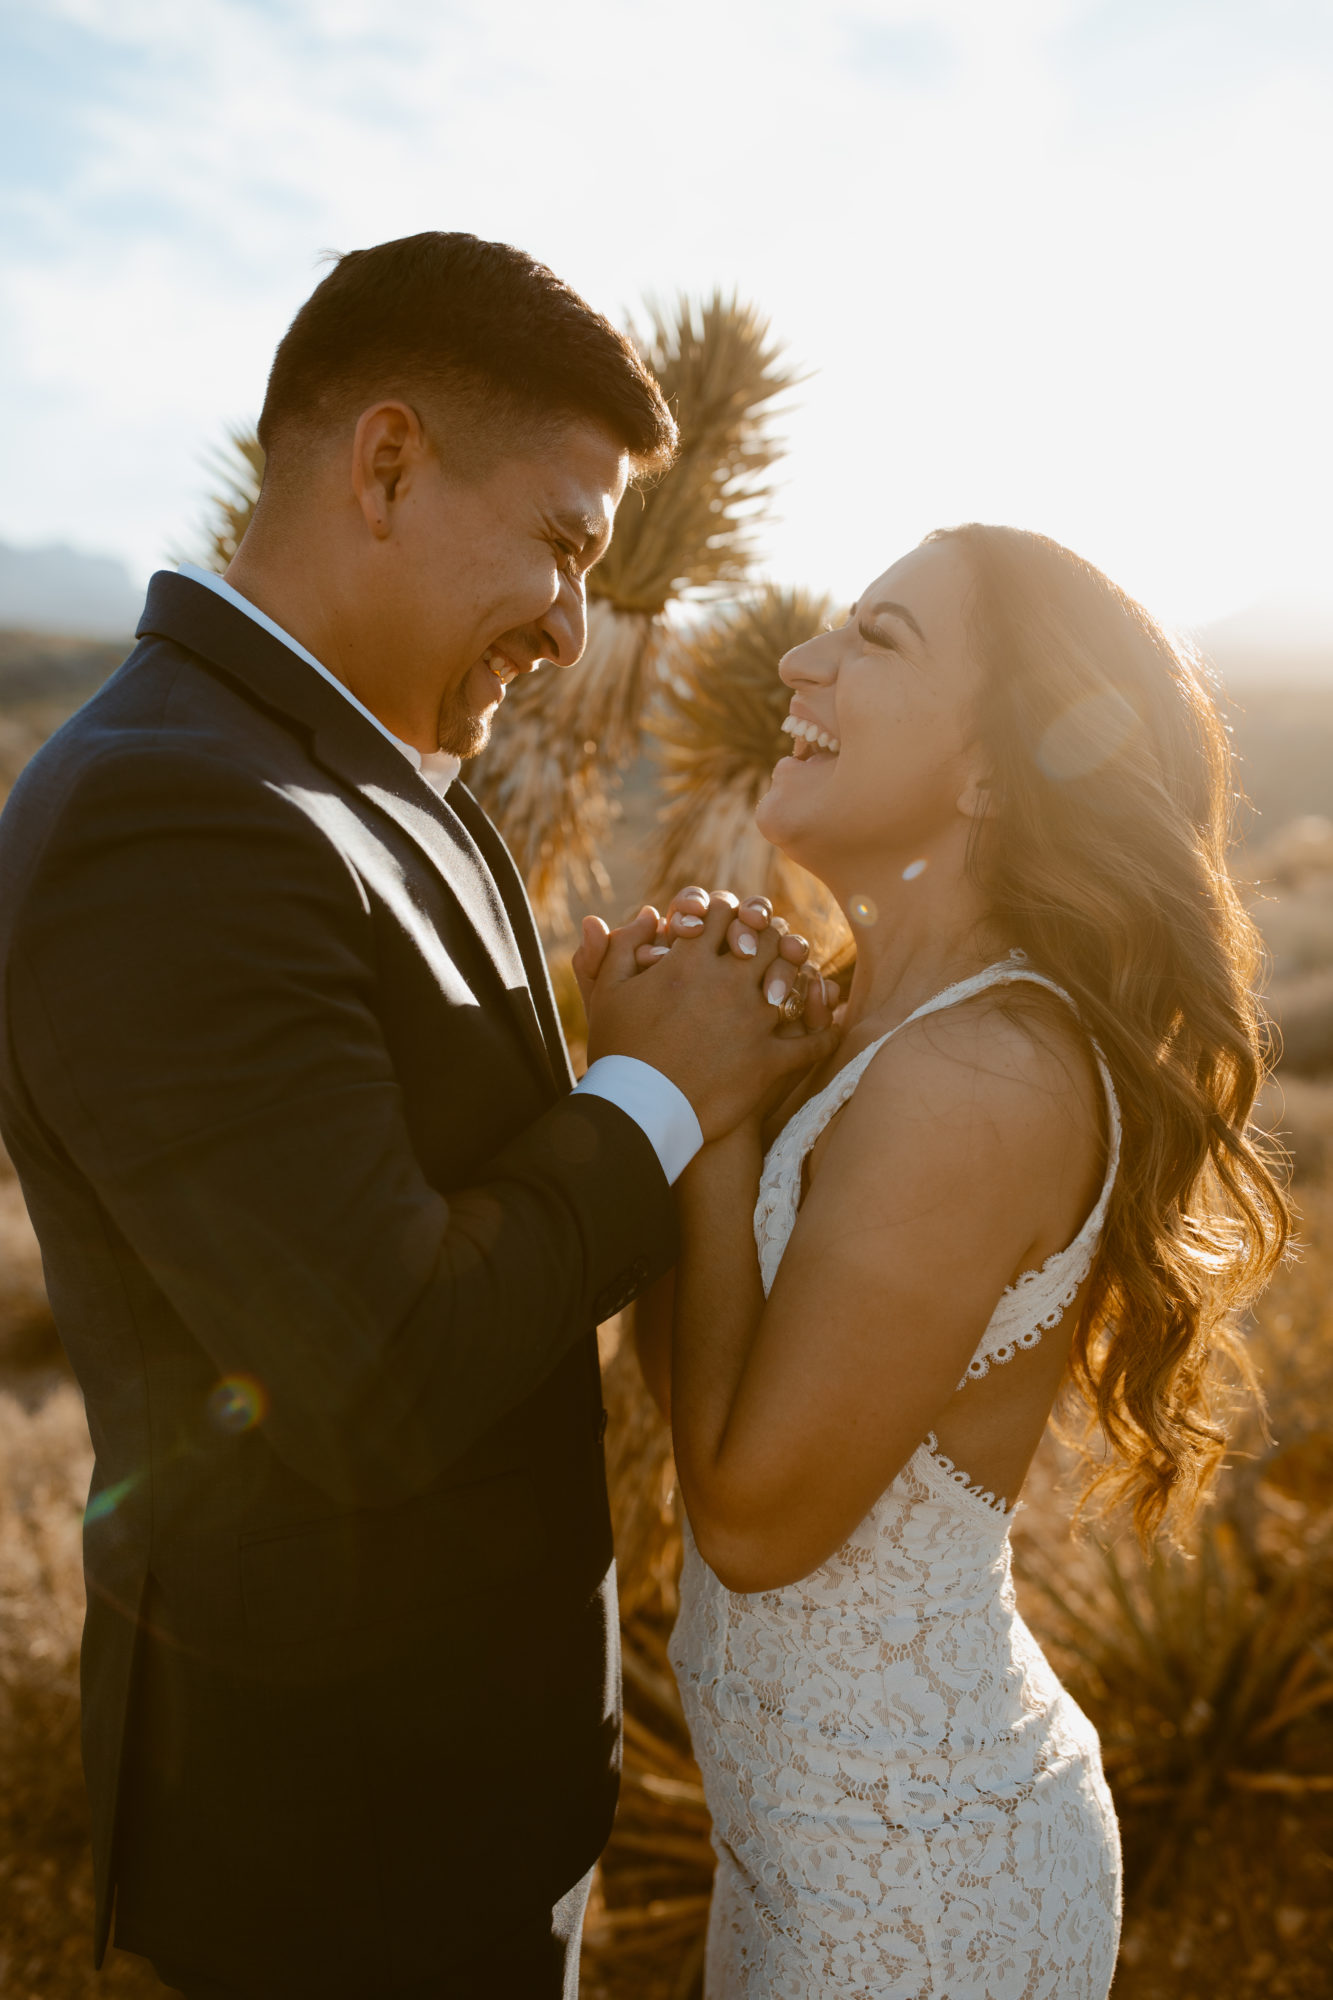 couple smiling at eachother during day after couples wedding photos in the desert 